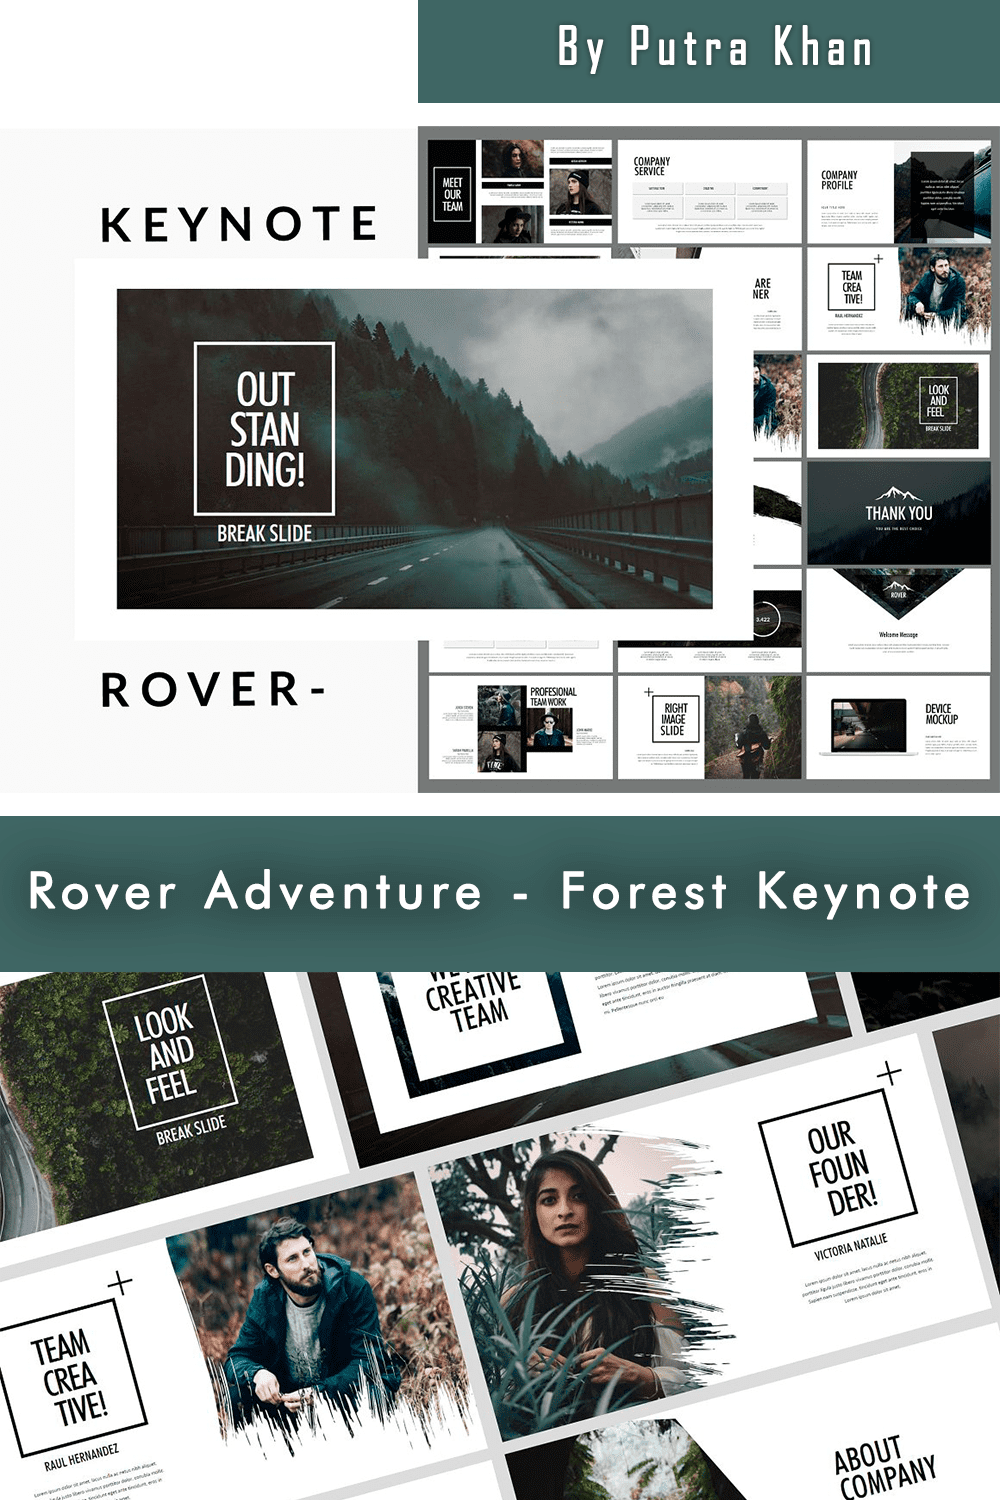 Rover Adventure - Forest Keynote - preview of Pinterest image.